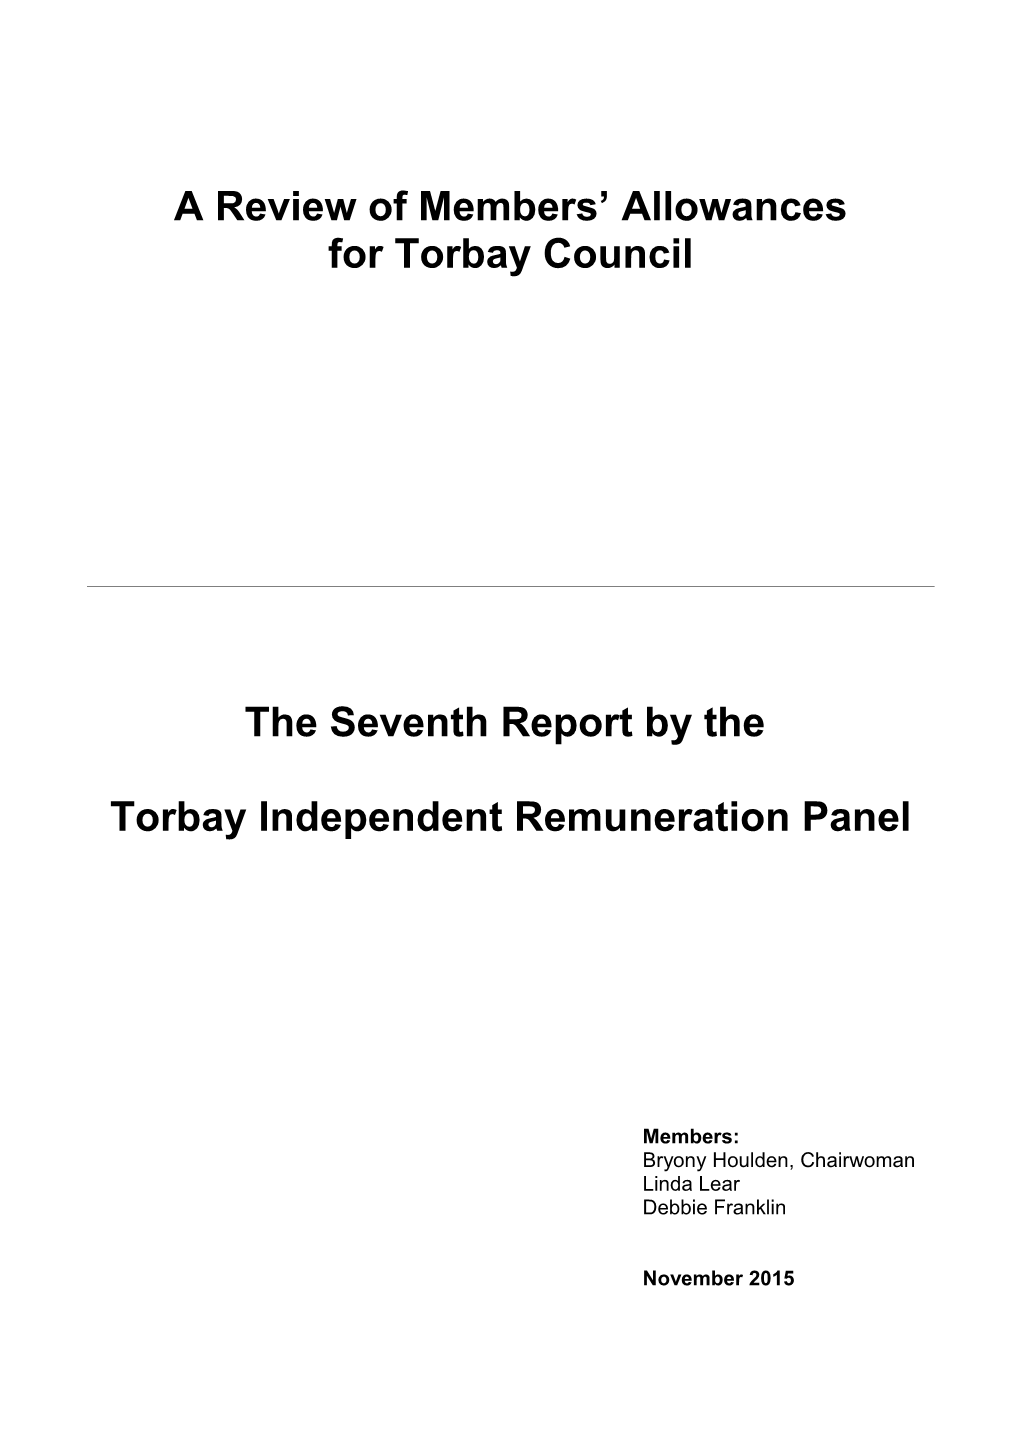 A Review of Members Allowances for Torbay Council